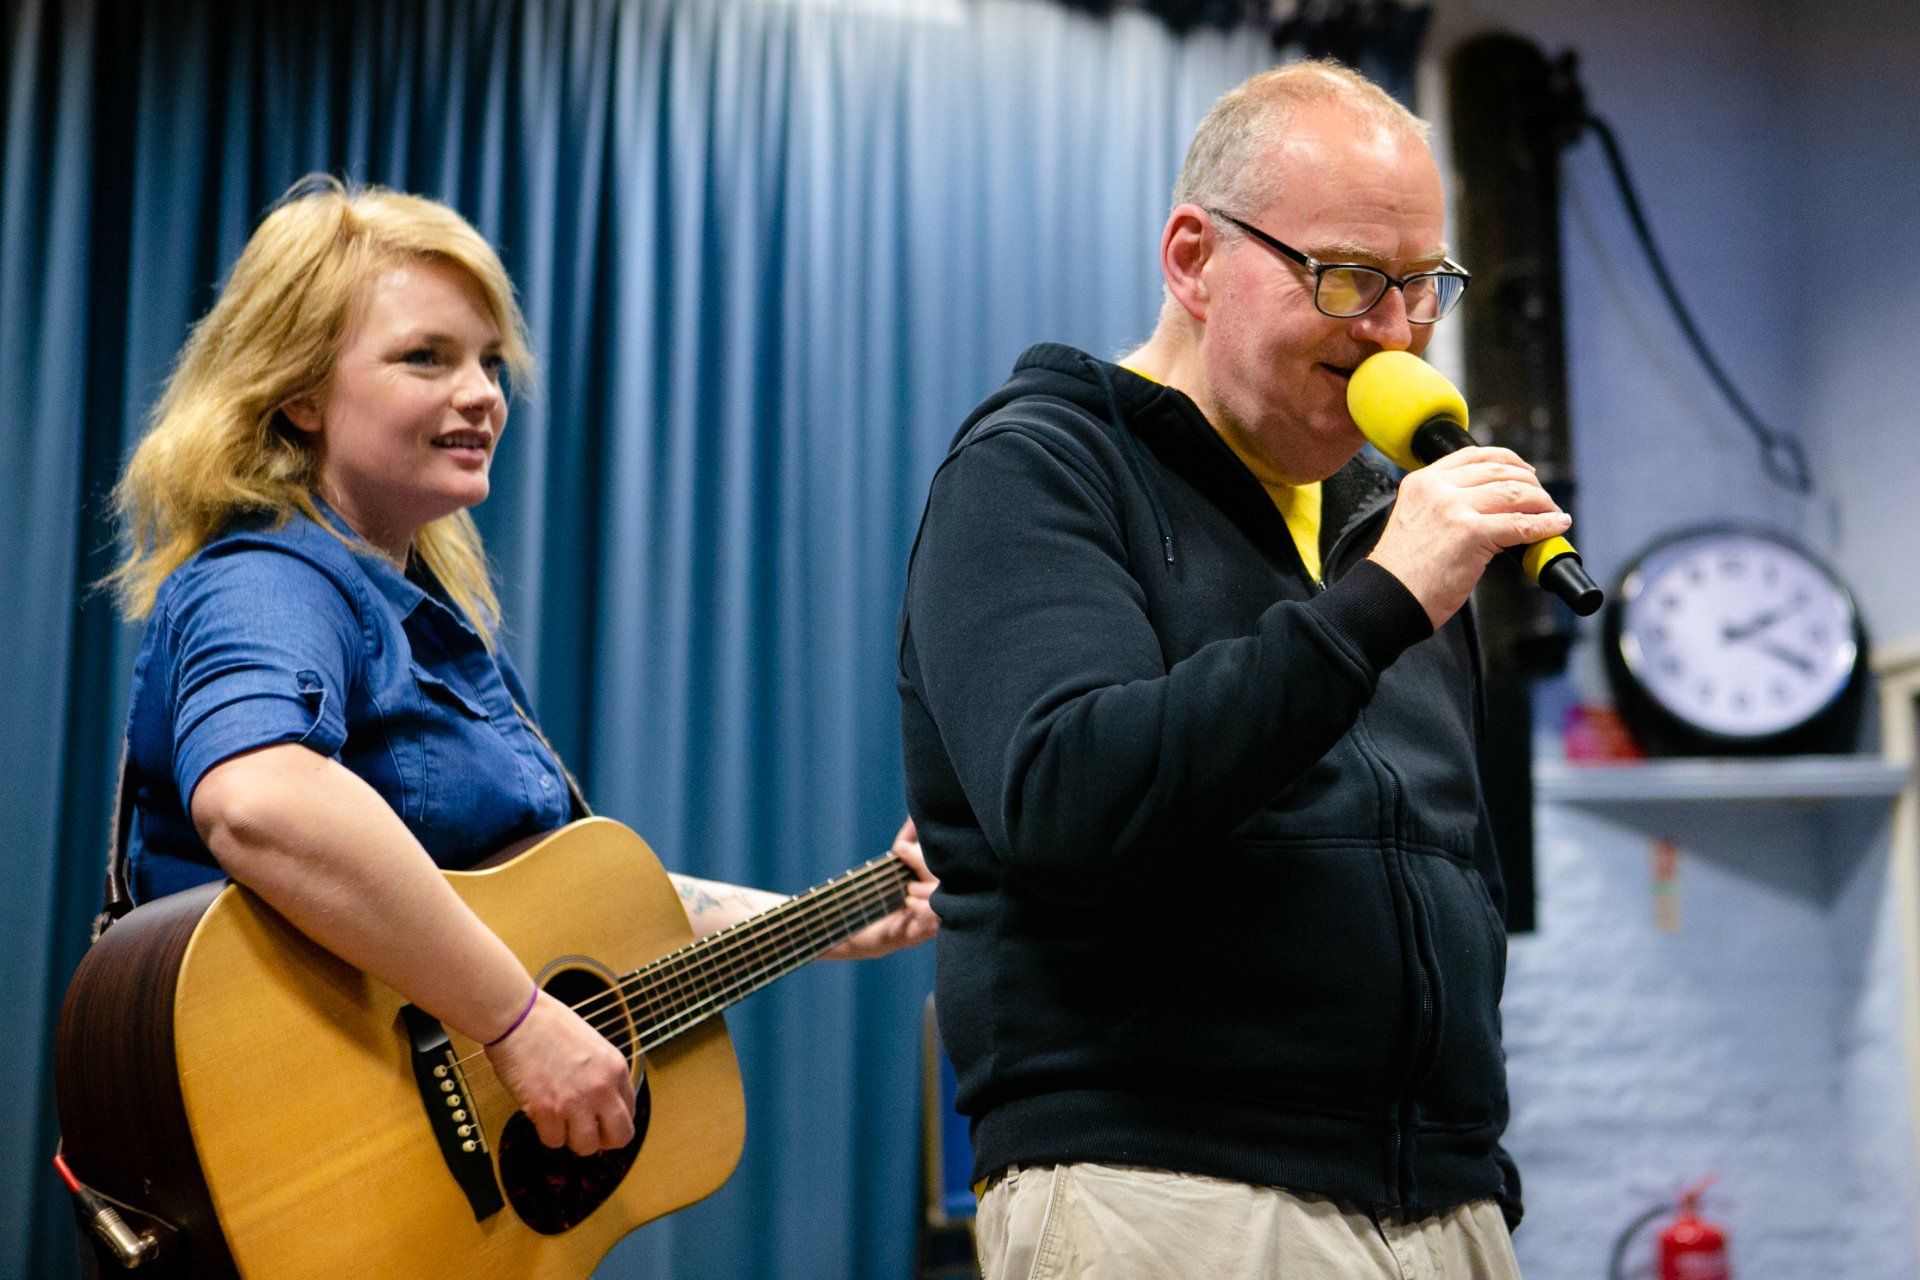 A learning disabled man is holding a microphone and singing. A woman on guitar is supporting his performance.